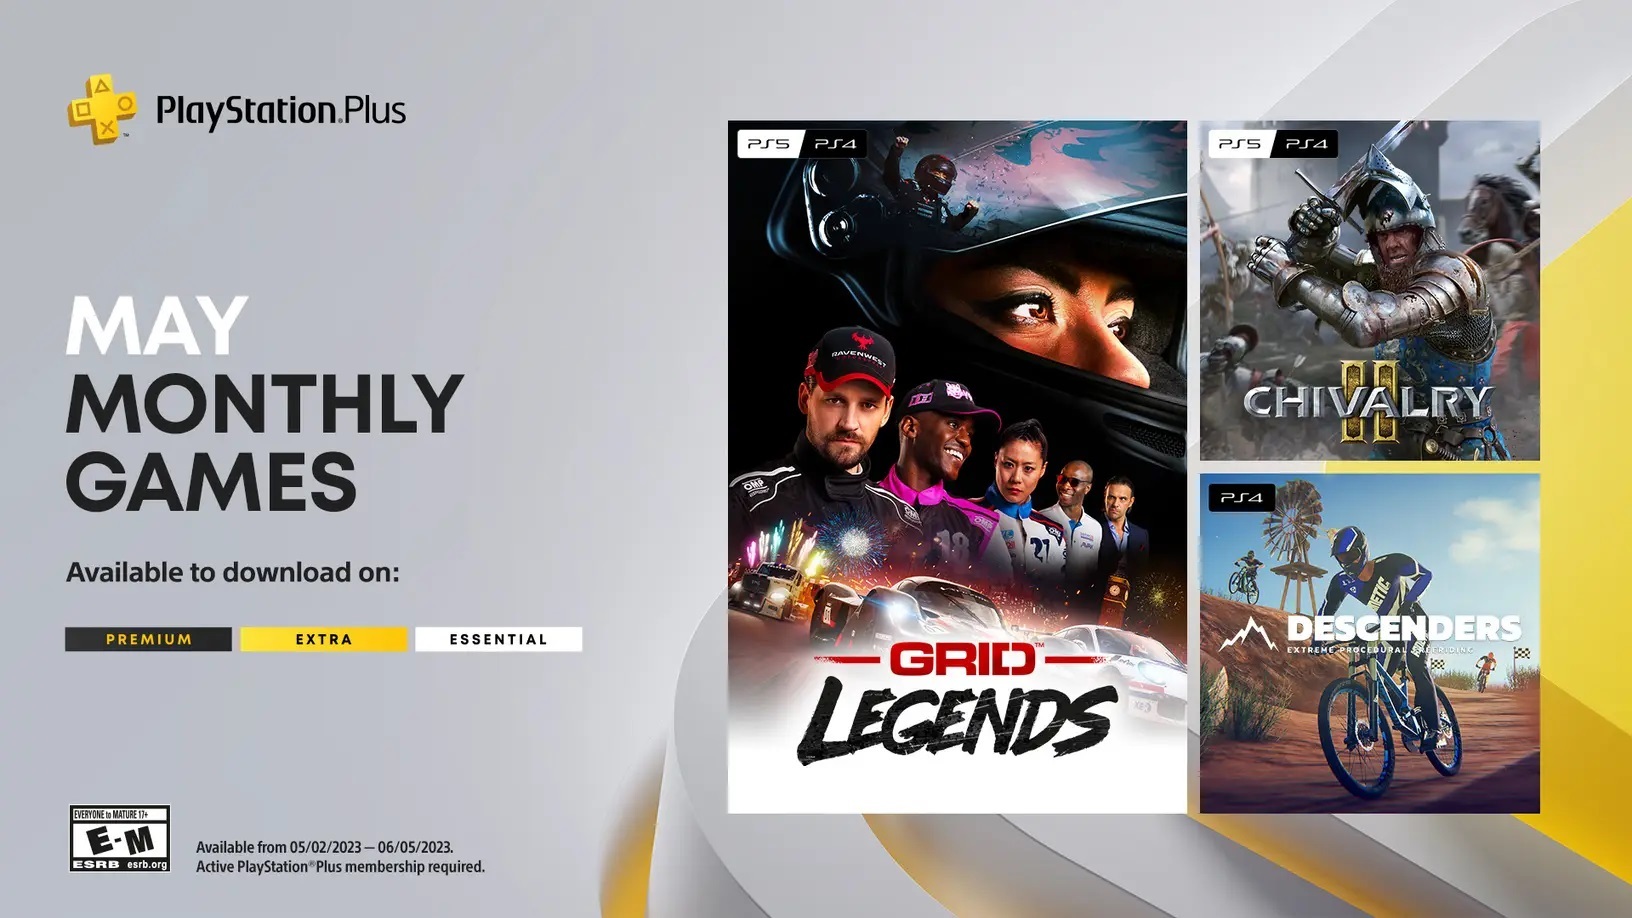 PS Plus Essential games confirmed for May